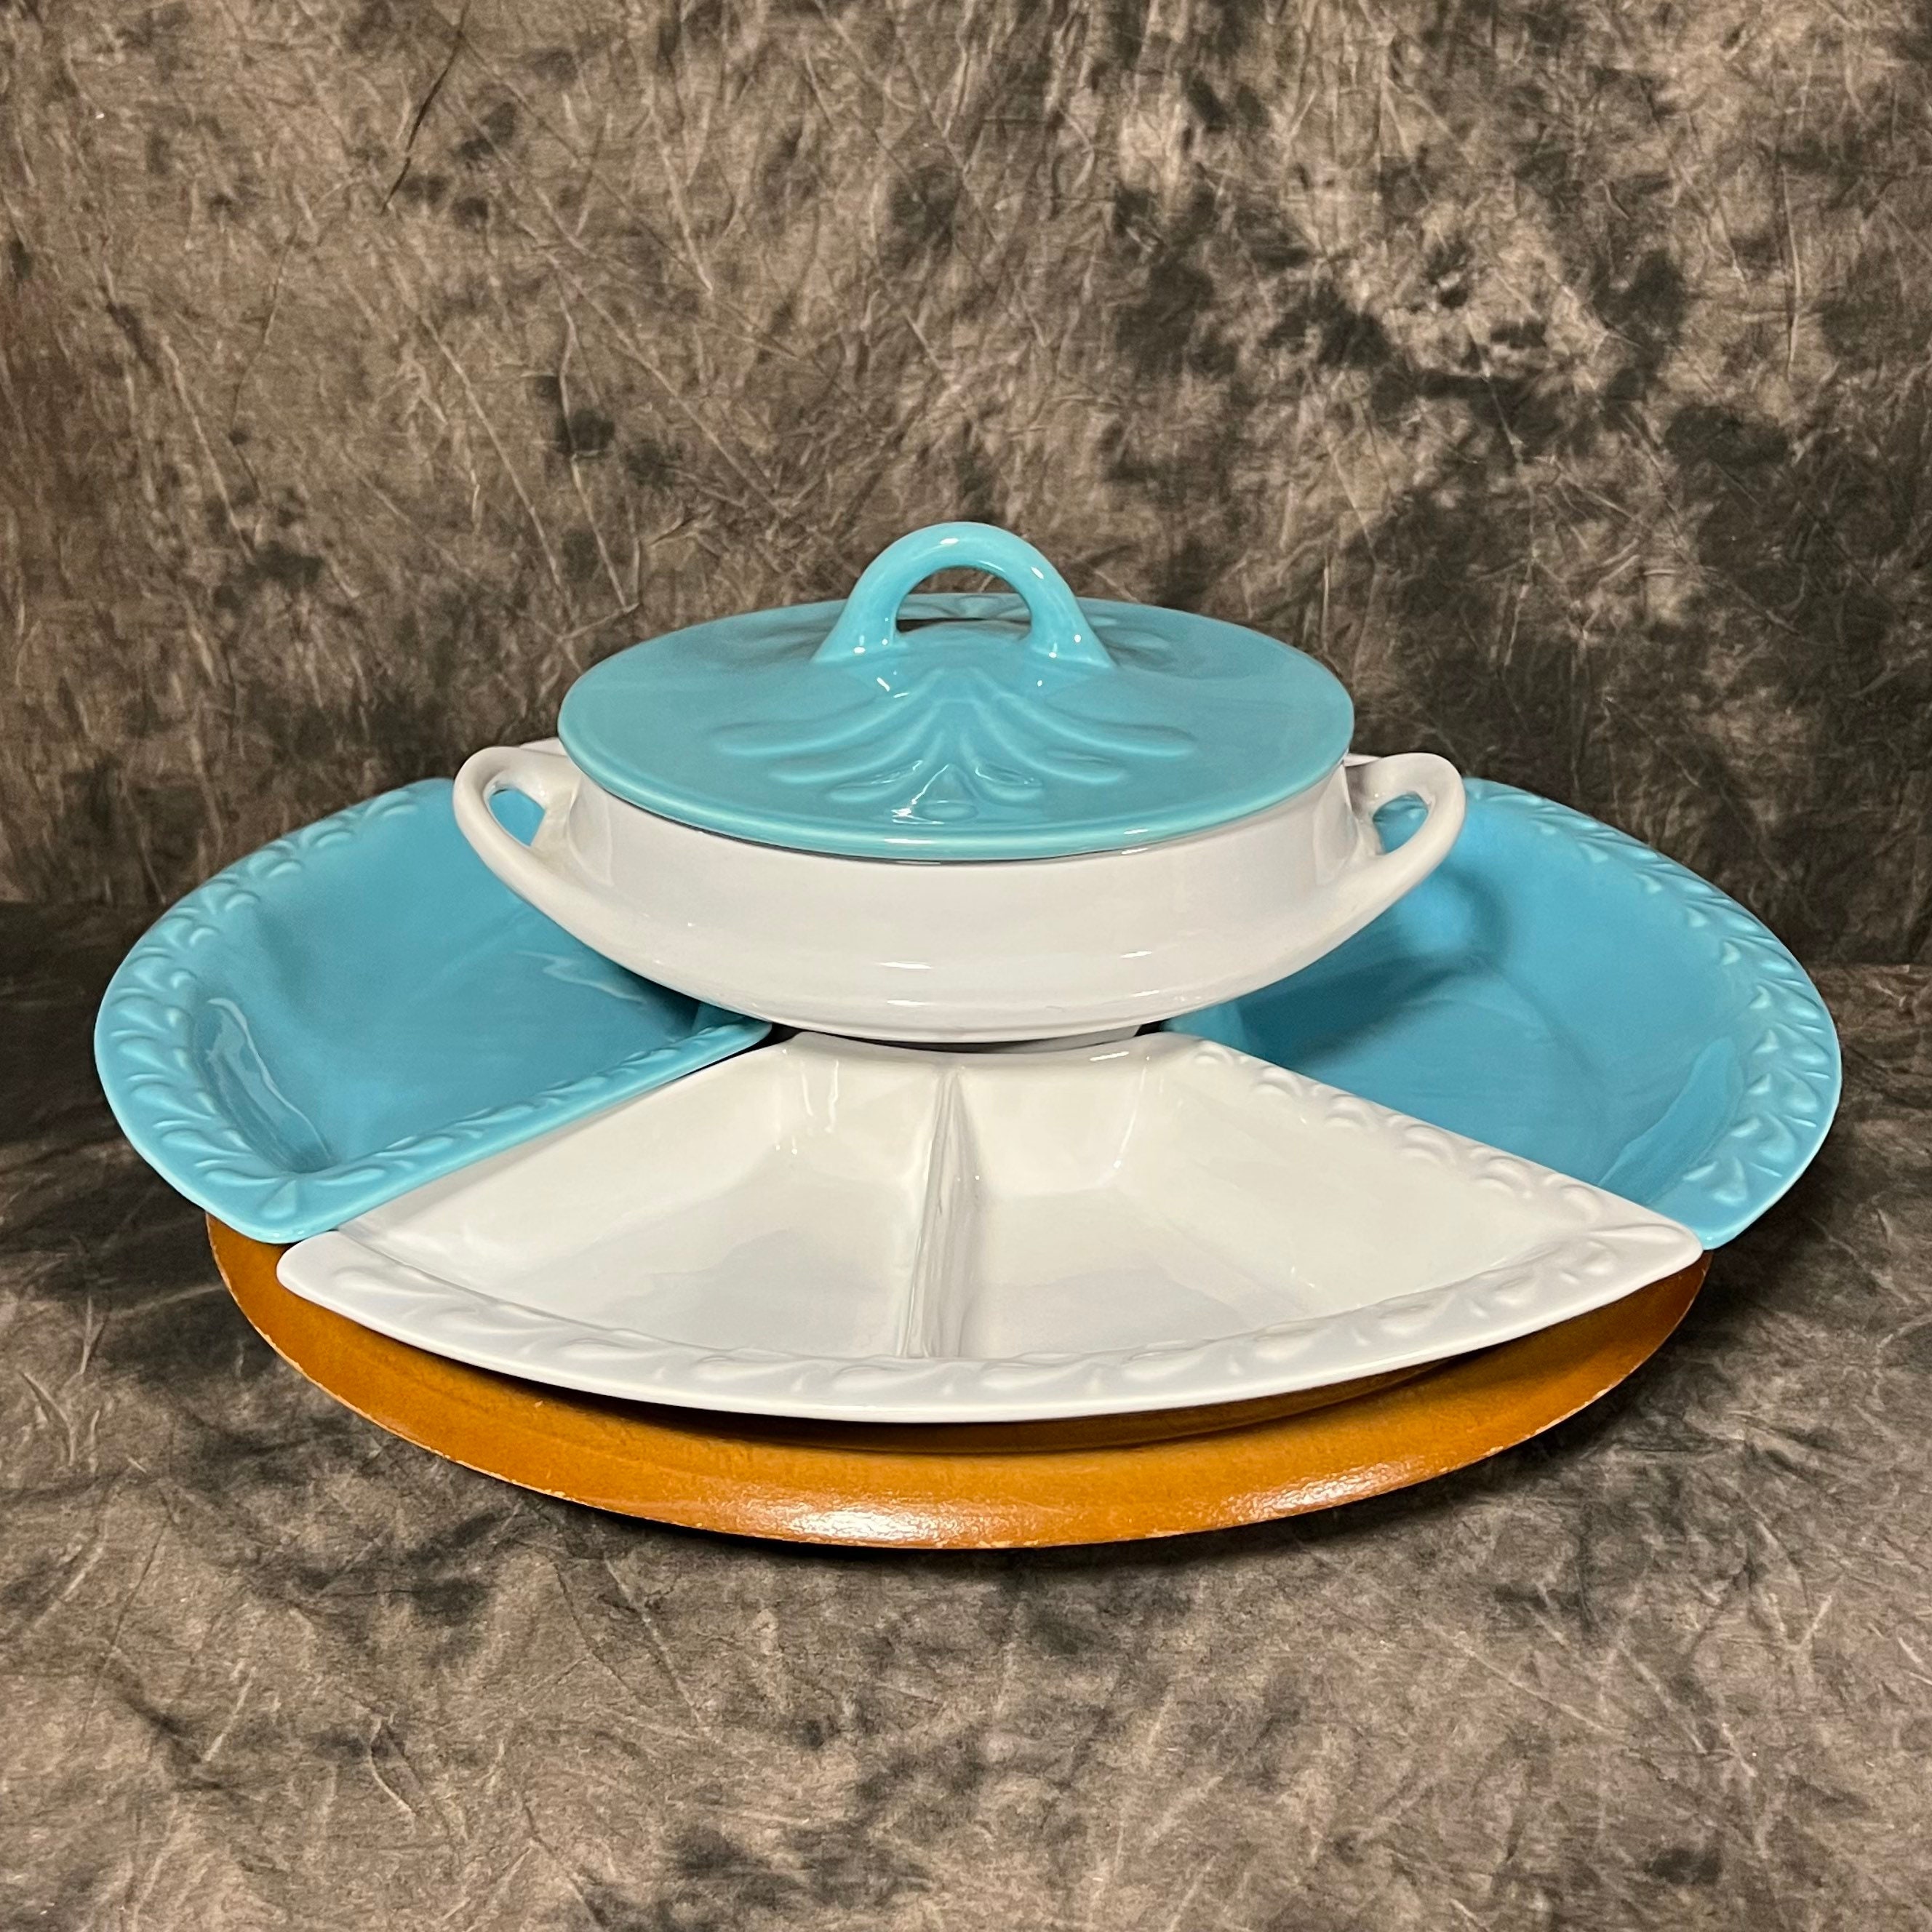 Mid Century, Lazy Susan Set, USA Pottery, Brown Yellow Mustard, Glazed Pottery,  Turntable Included, Vintage, Chip and Dip Set, Party Serving 